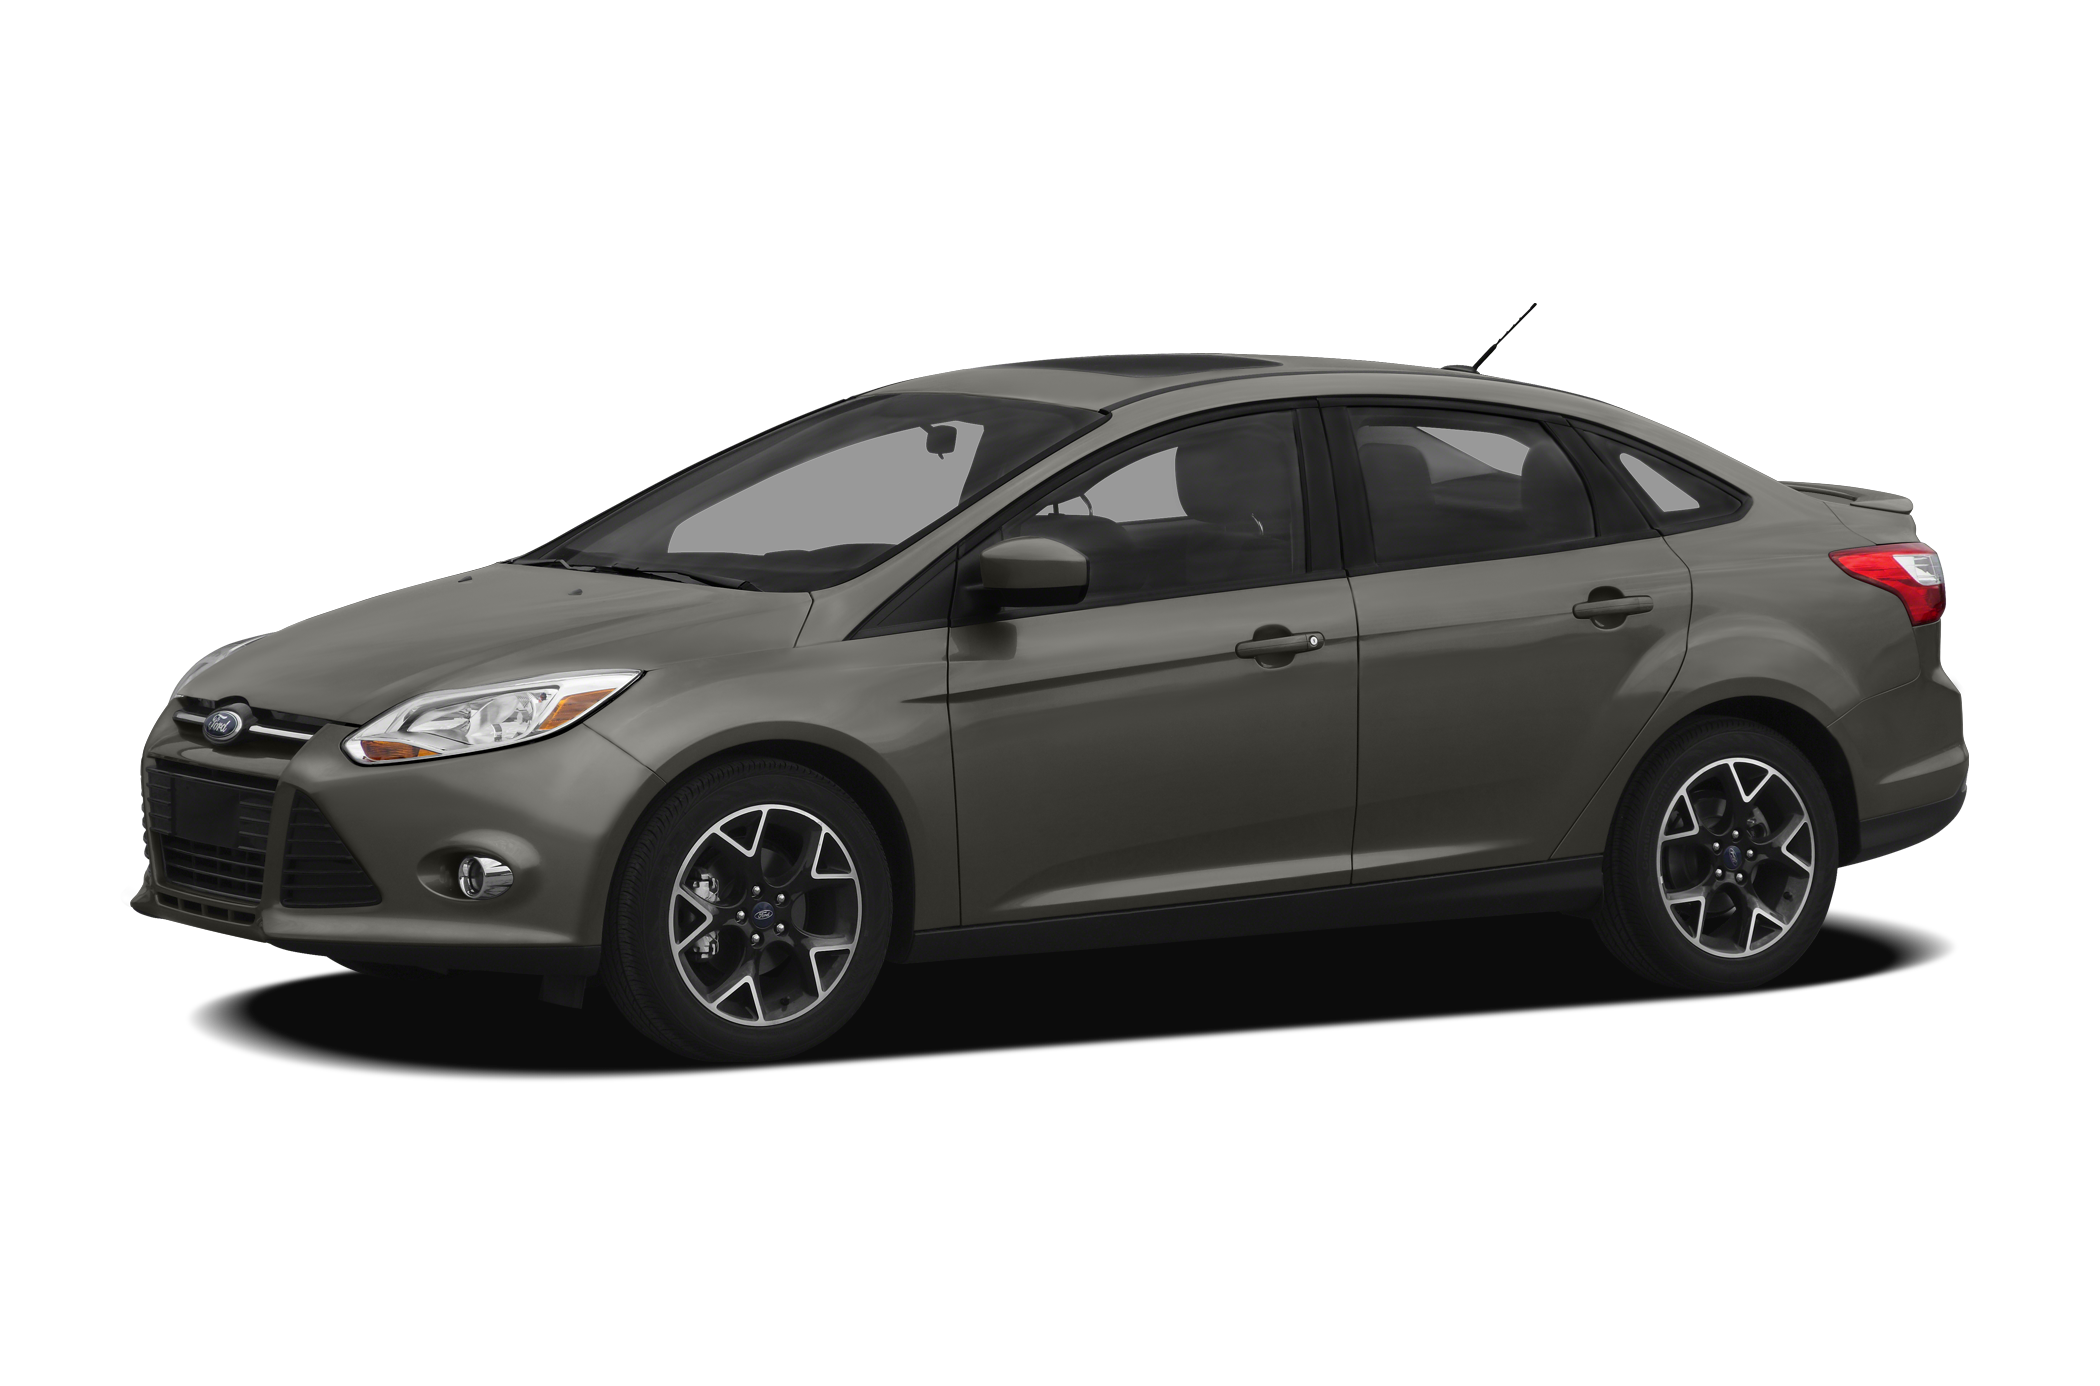 2012 Ford Focus Specs, Price, MPG & Reviews